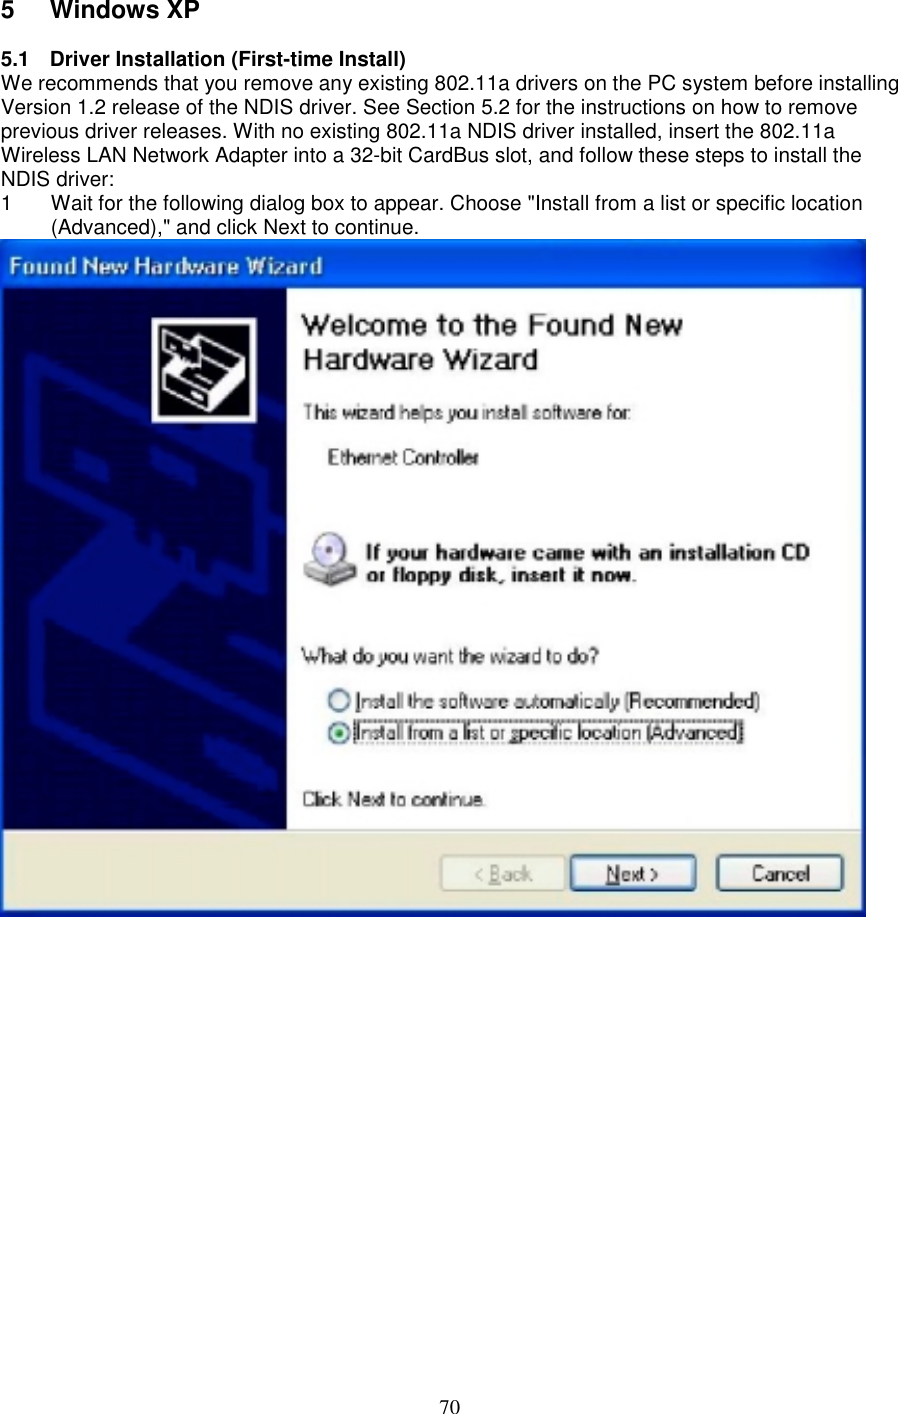 705 Windows XP5.1 Driver Installation (First-time Install)We recommends that you remove any existing 802.11a drivers on the PC system before installingVersion 1.2 release of the NDIS driver. See Section 5.2 for the instructions on how to removeprevious driver releases. With no existing 802.11a NDIS driver installed, insert the 802.11aWireless LAN Network Adapter into a 32-bit CardBus slot, and follow these steps to install theNDIS driver:1  Wait for the following dialog box to appear. Choose &quot;Install from a list or specific location(Advanced),&quot; and click Next to continue.